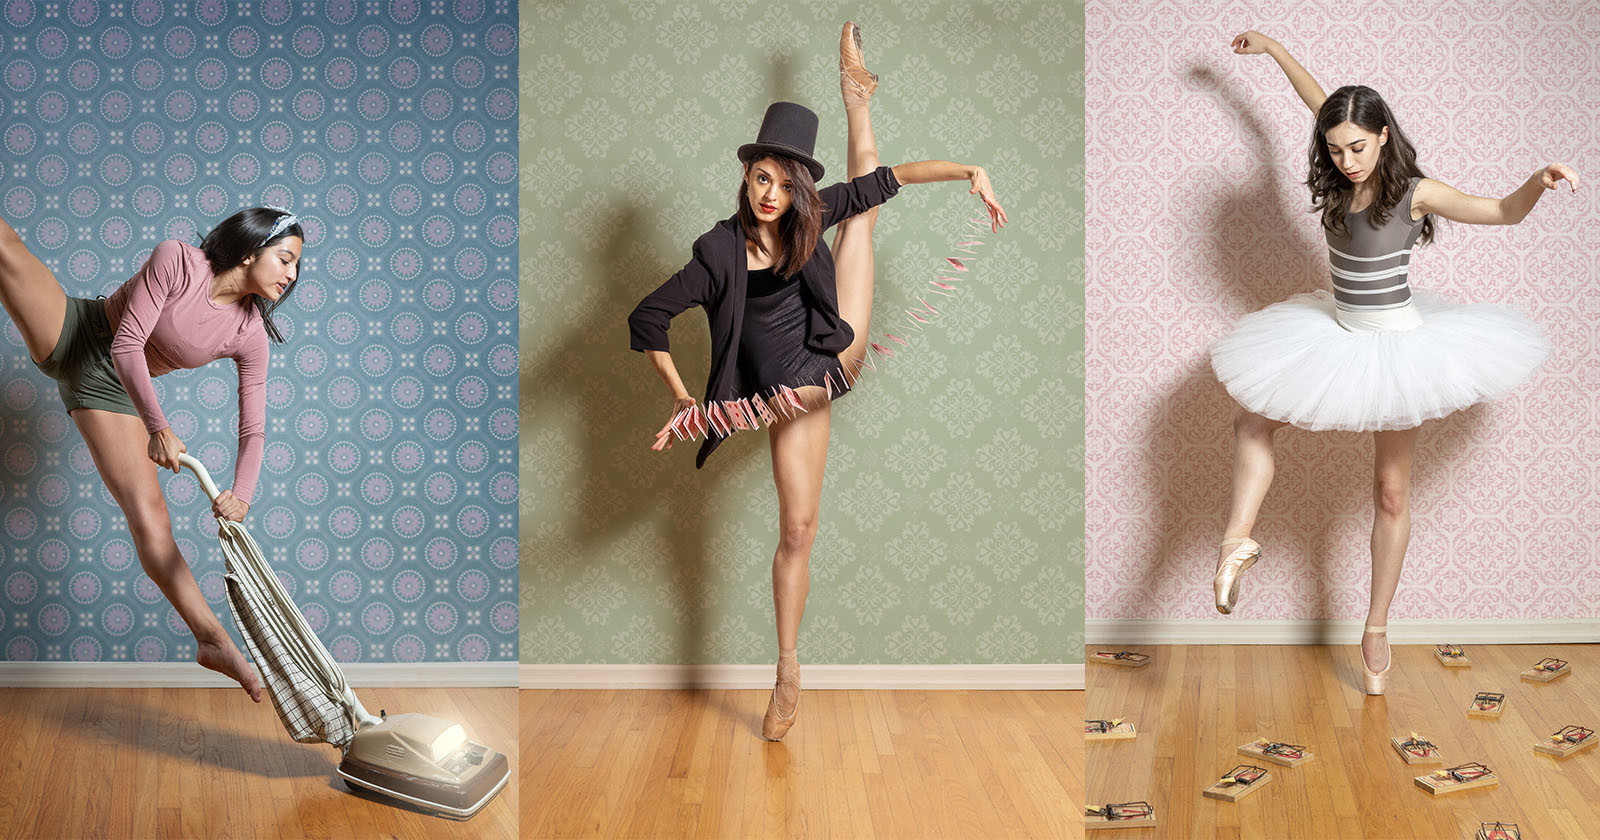  creative photo series imagines dancers performing household chores 